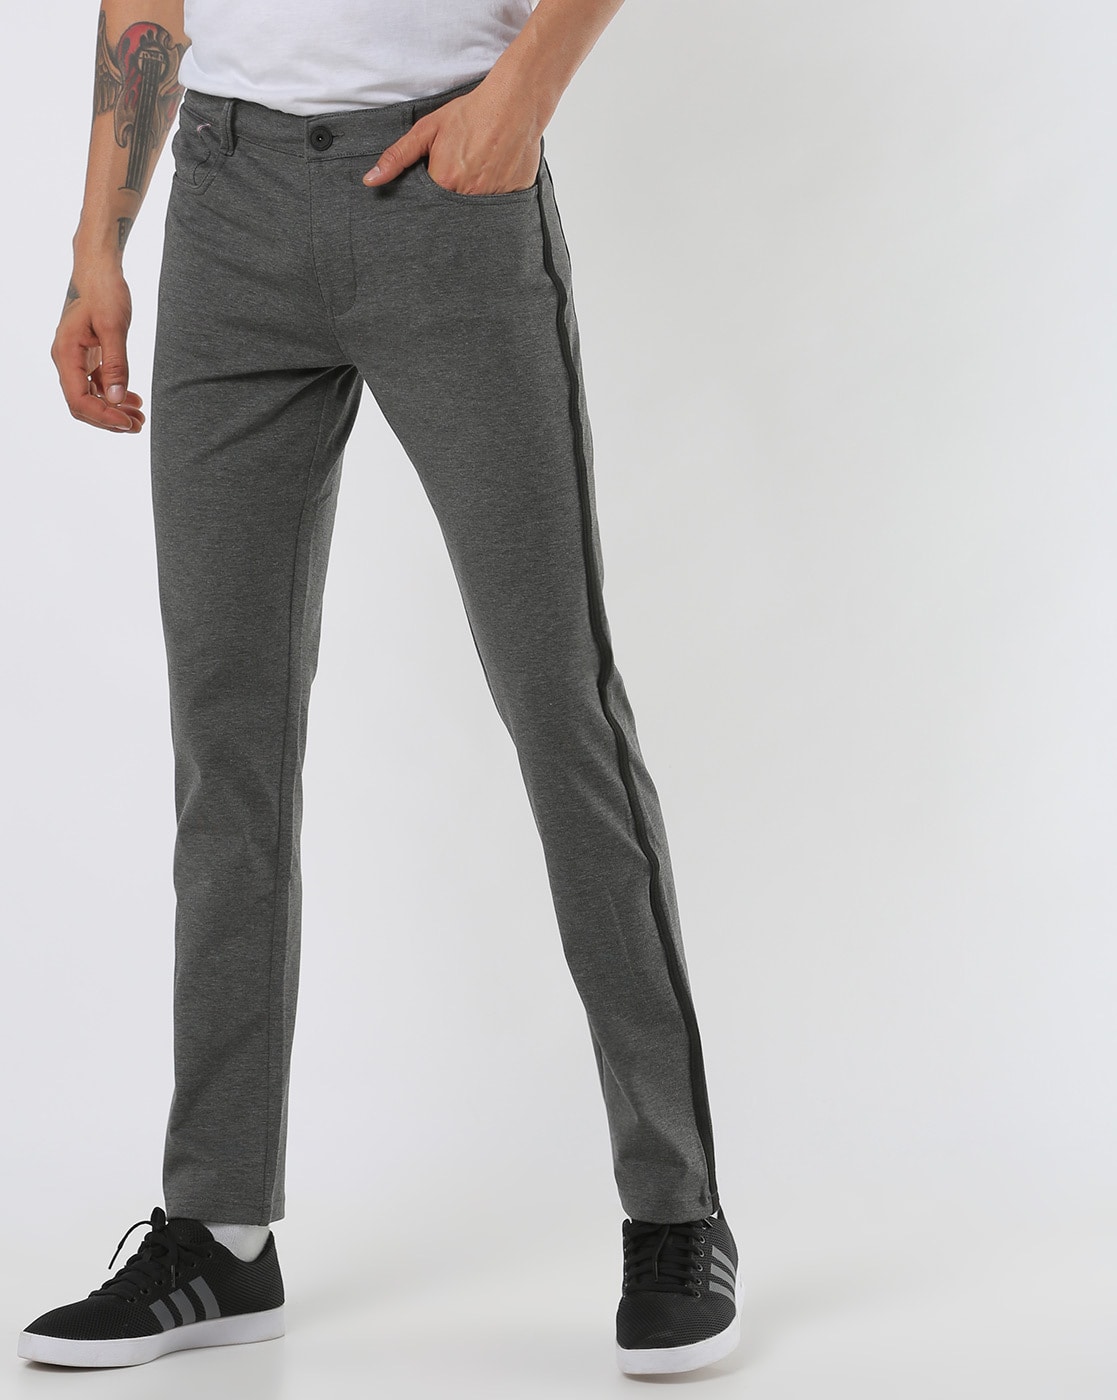 Buy Hiltl Men Charcoal SolidTextured Flat Front Trousers Online  788720   The Collective